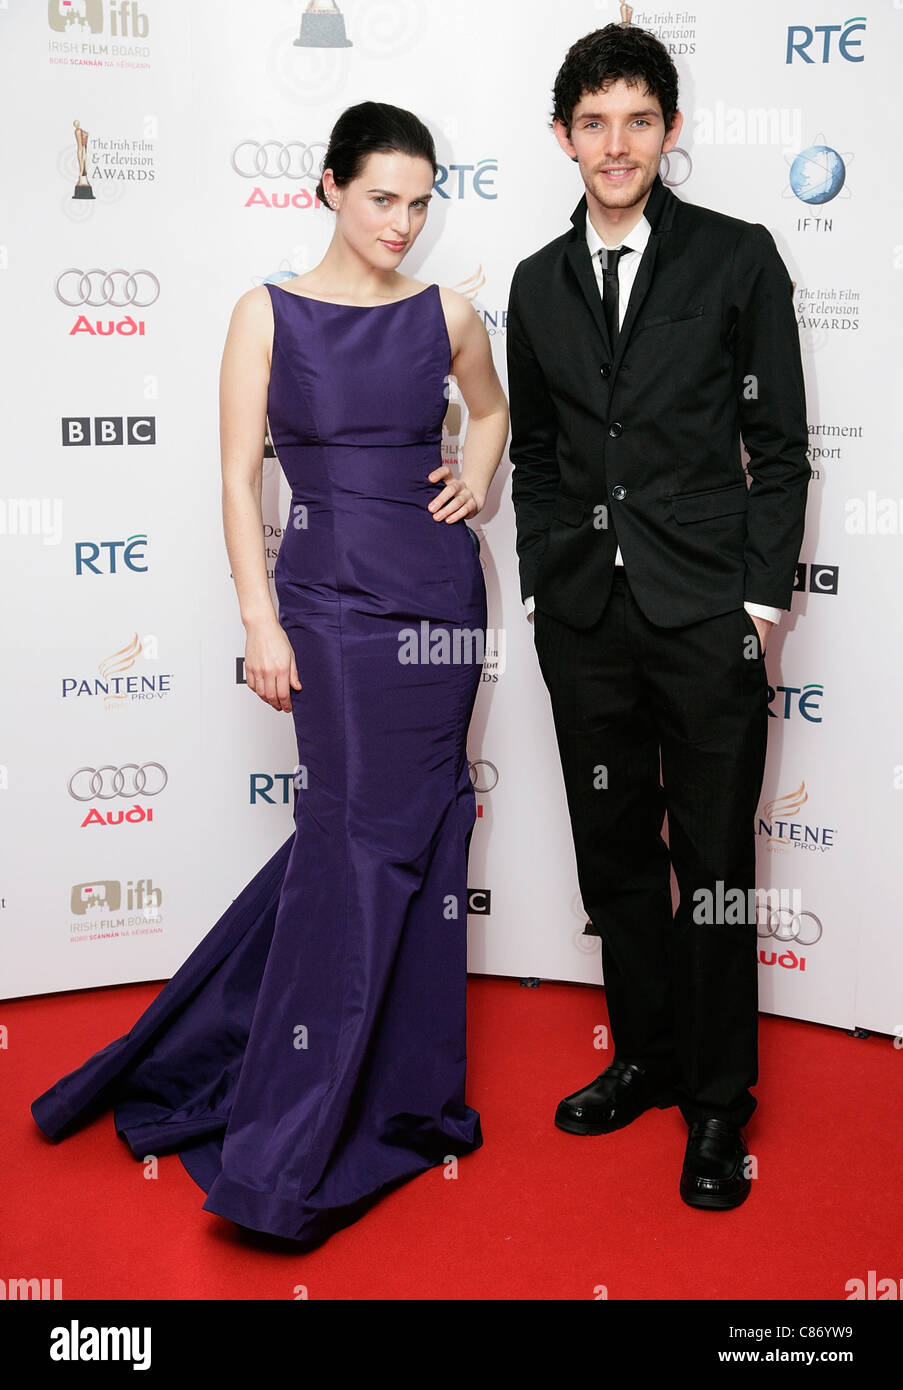 DUBLIN, IRELAND - FEBRUARY 14: Katie McGrath and Colin Morgan attend the press room at the 6th Annual Irish Film and Television Awards at the Burlington Hotel on February 14, 2009 in Dublin, Ireland Stock Photo